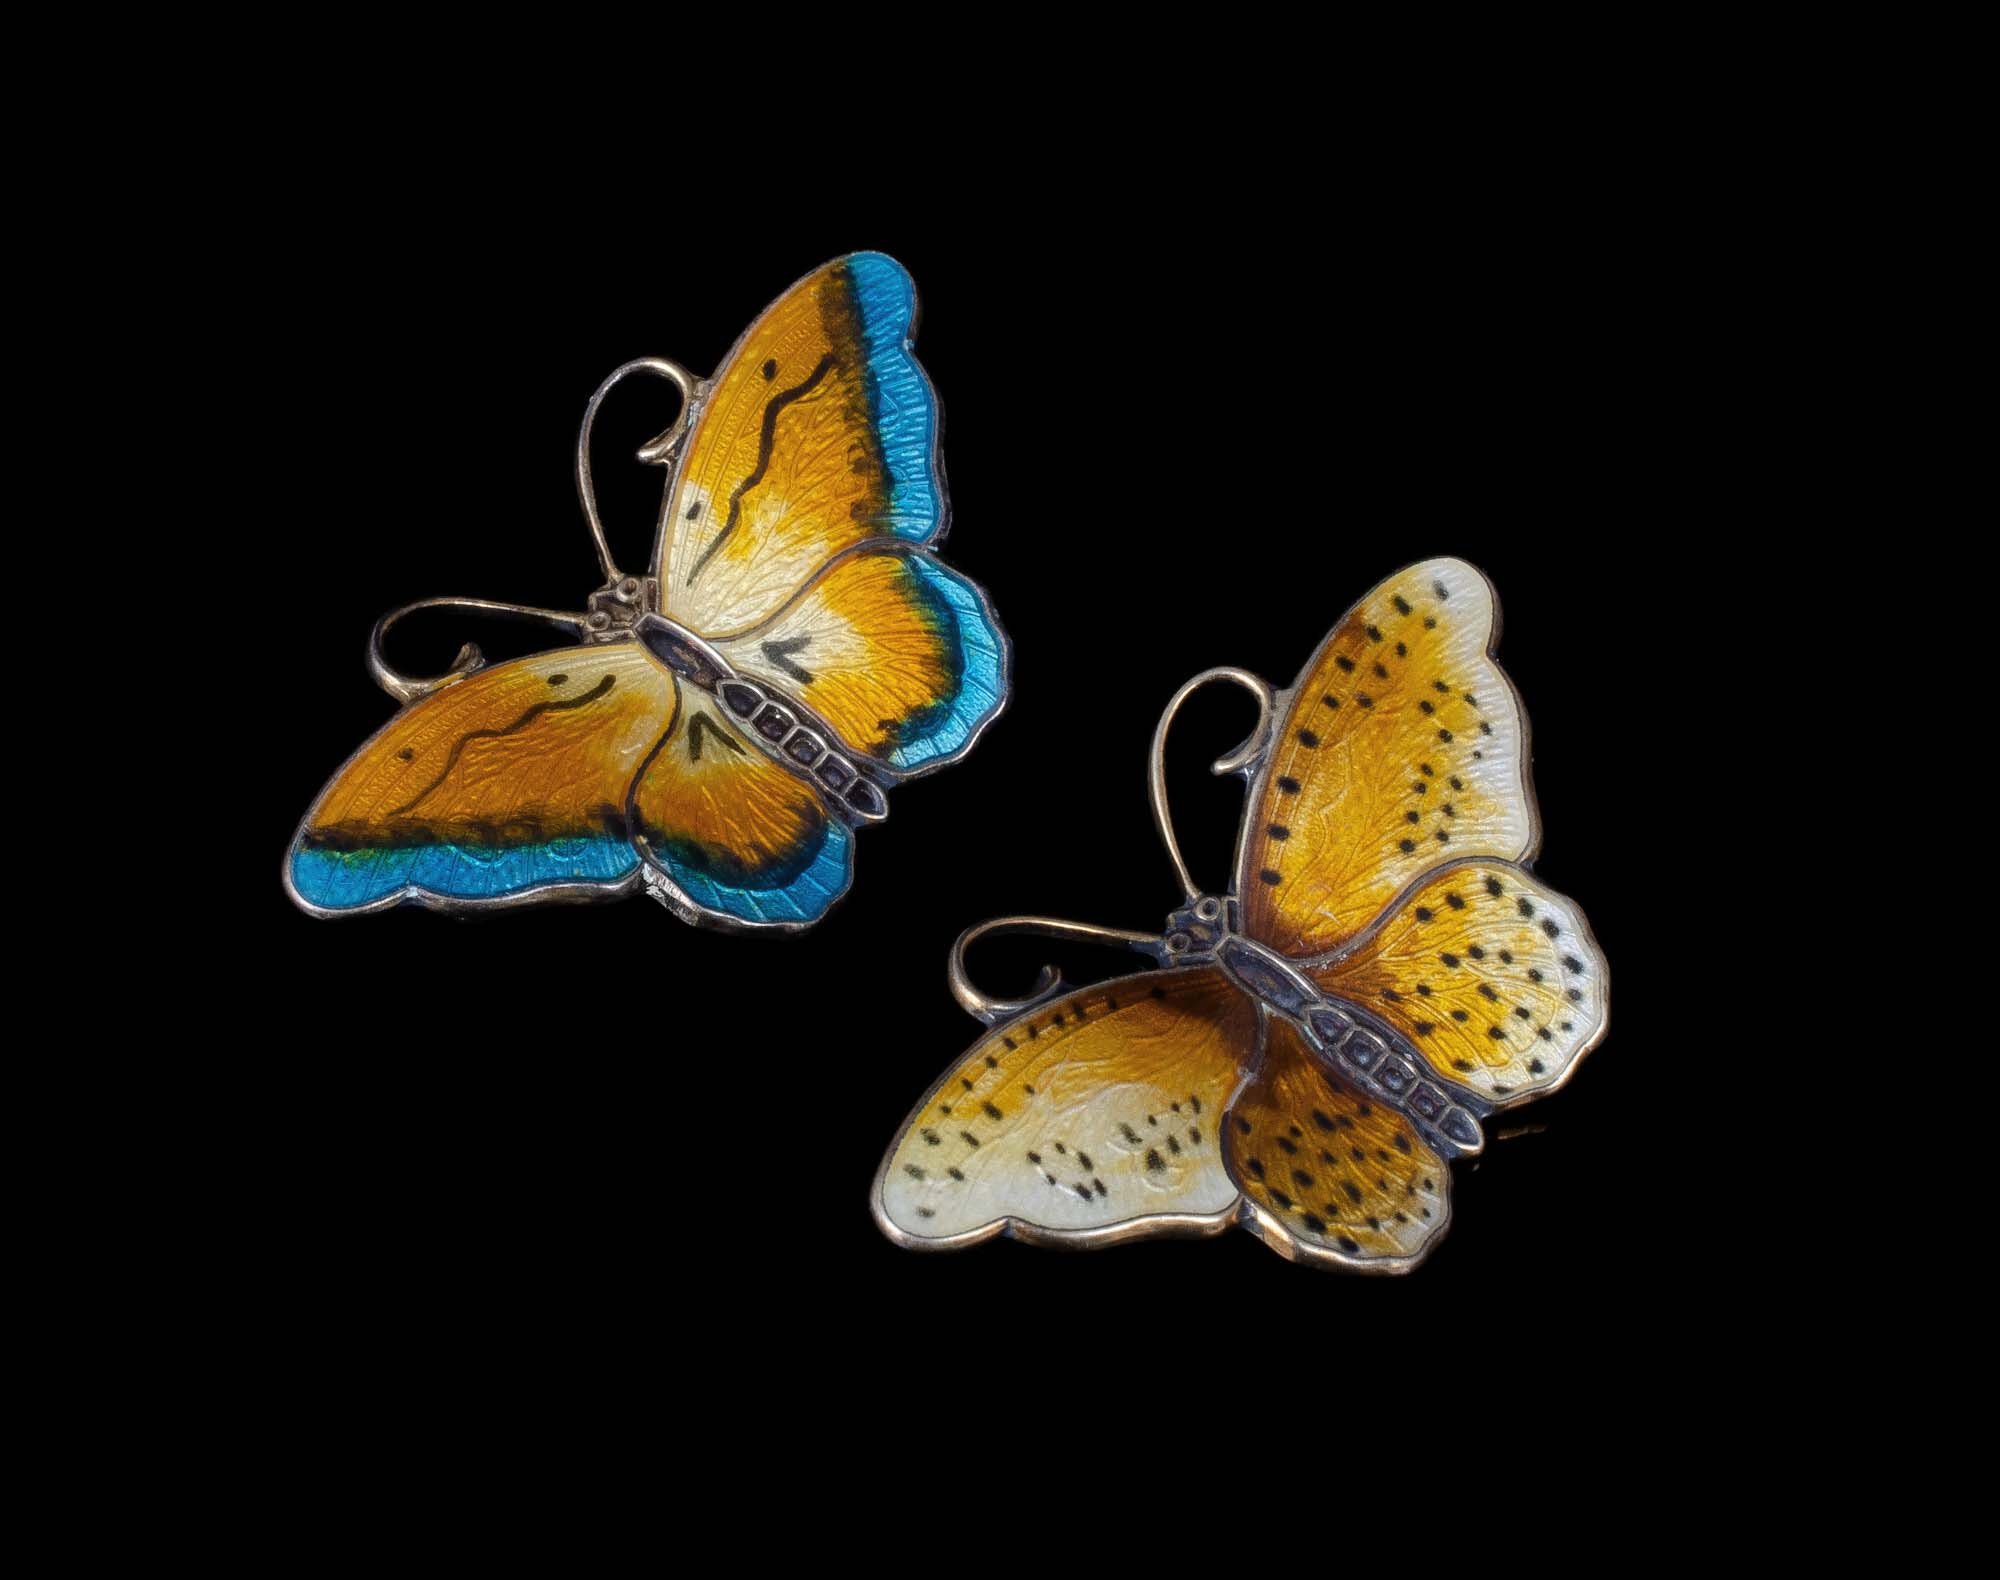 Hroar Prydz Norway silver and enamel butterfly Brooches